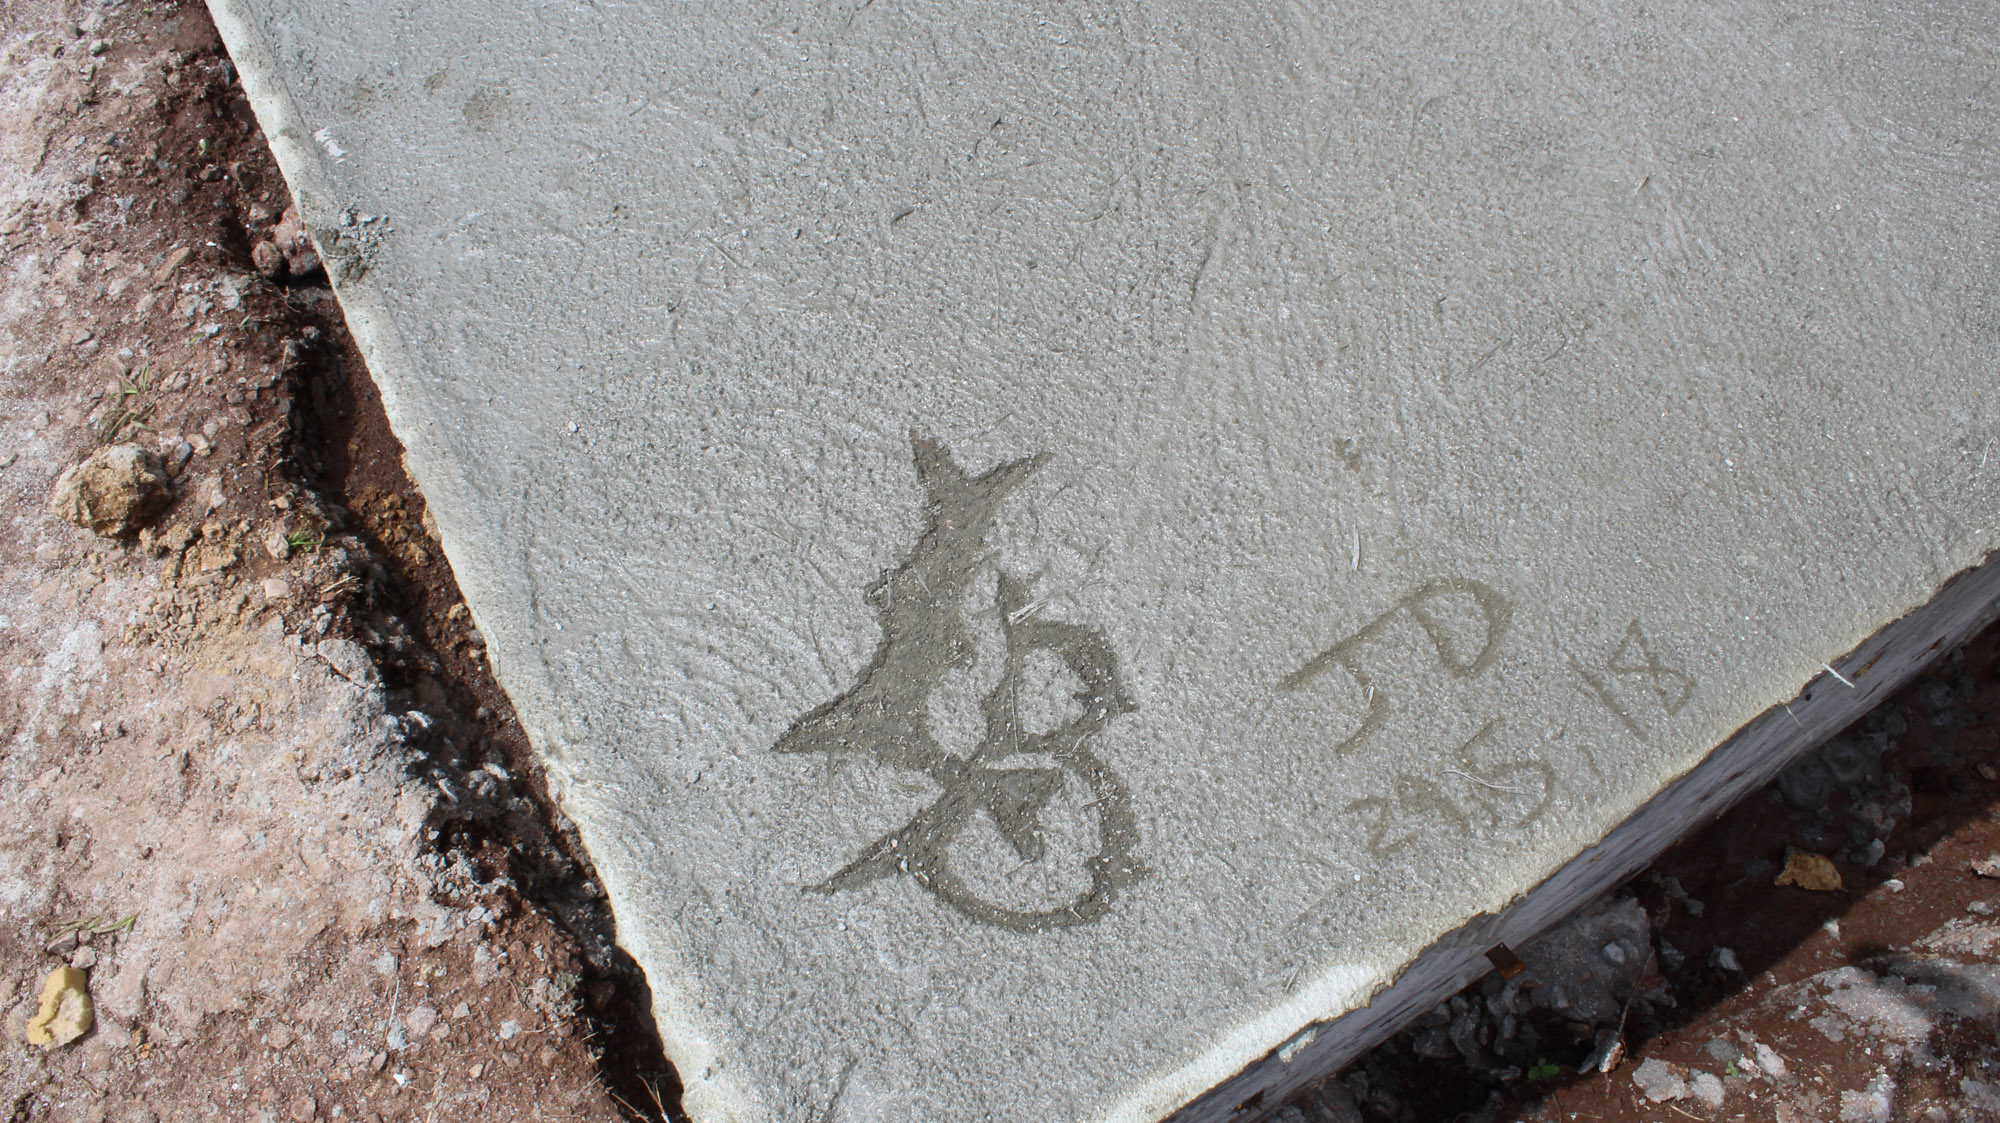 LB etched in concrete